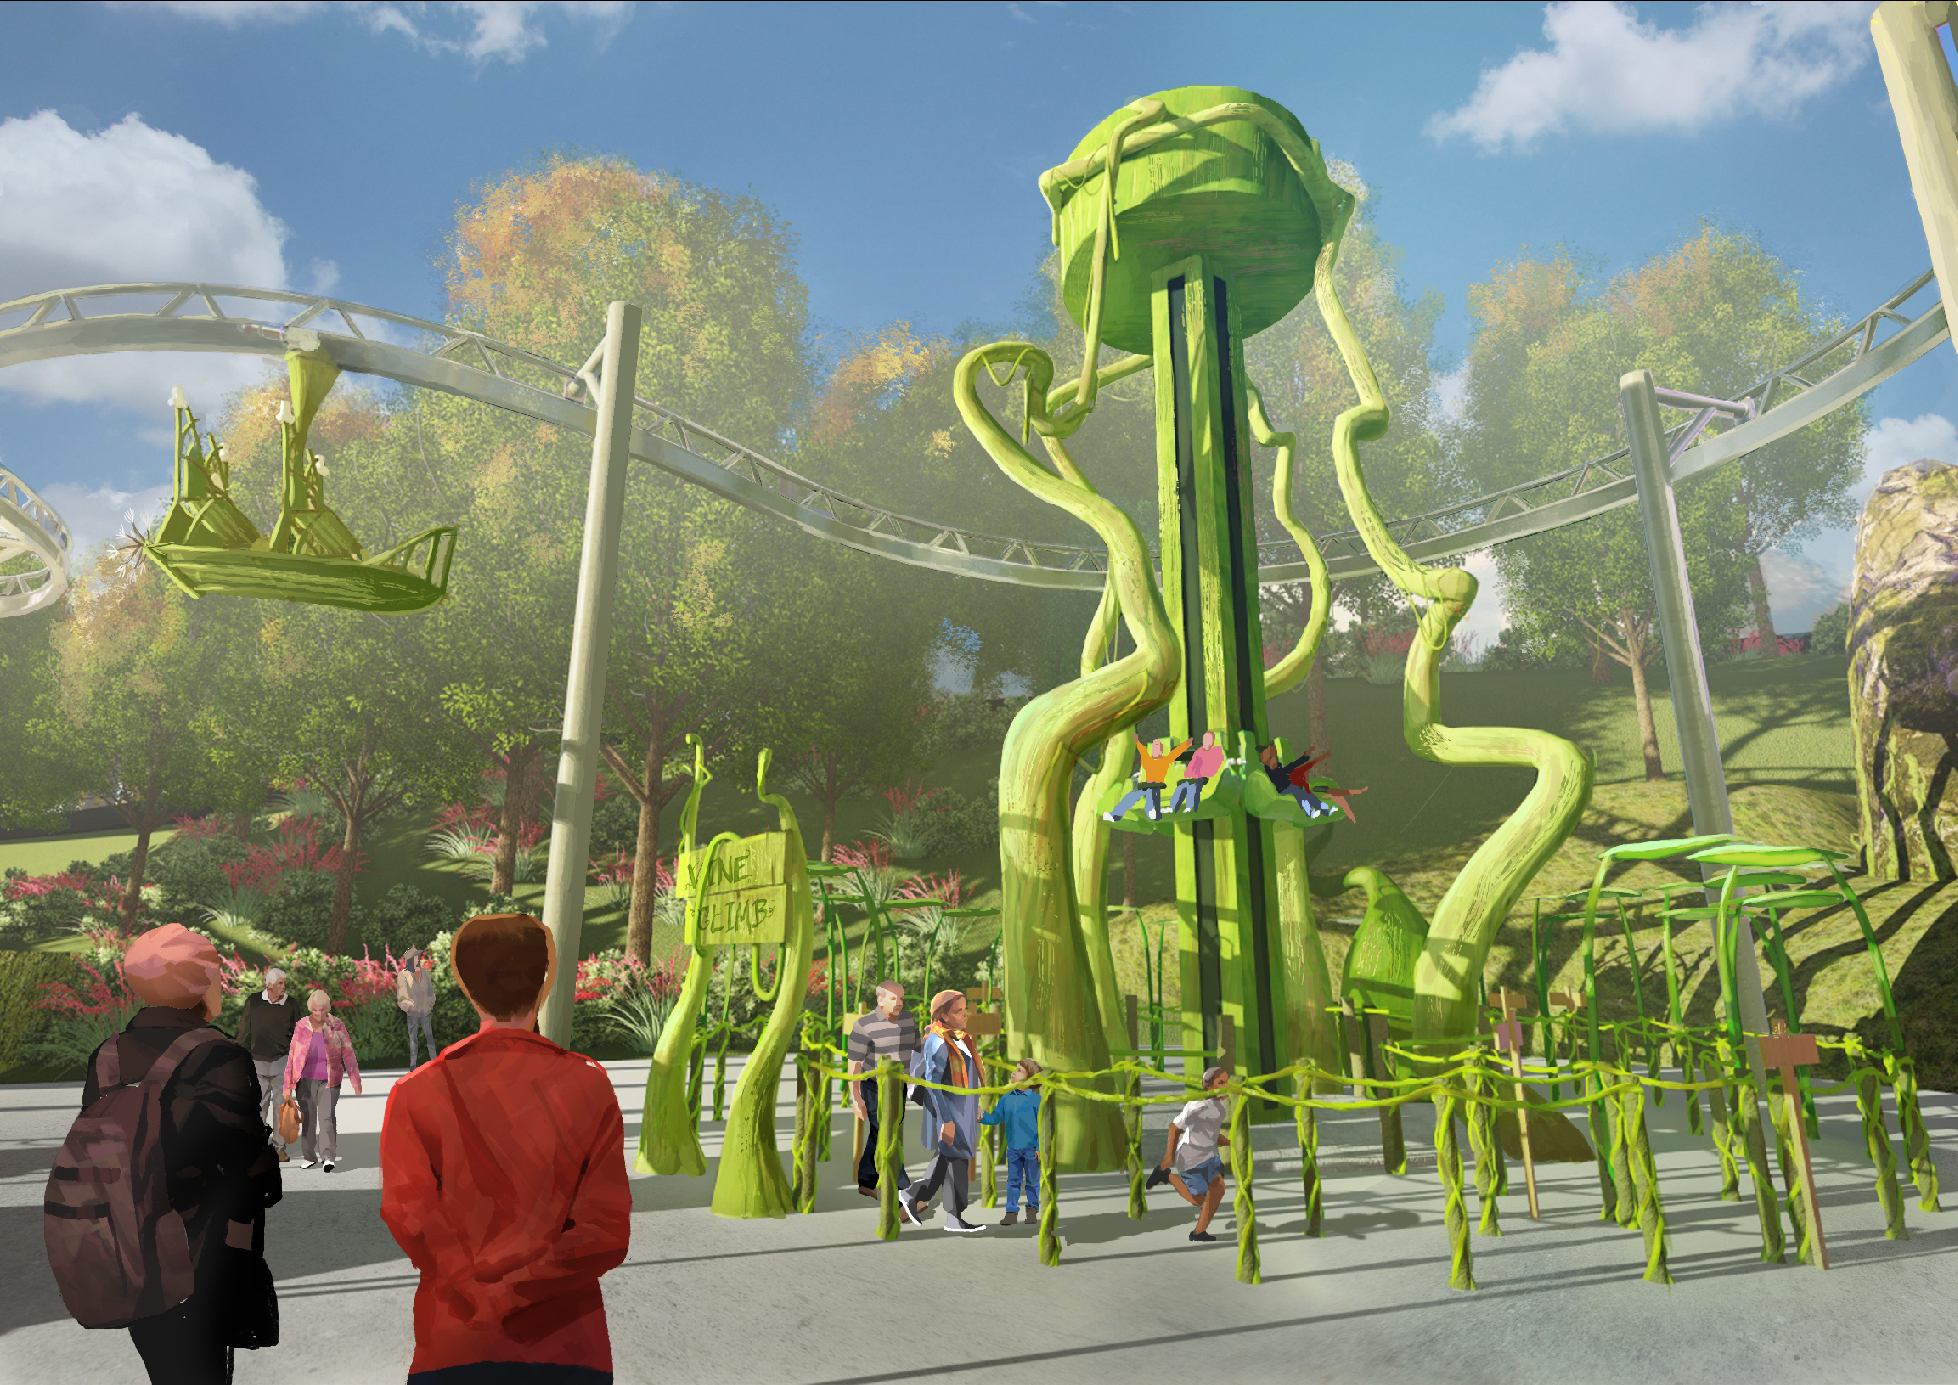 A green Drop tower attraction at Theme Park with vines